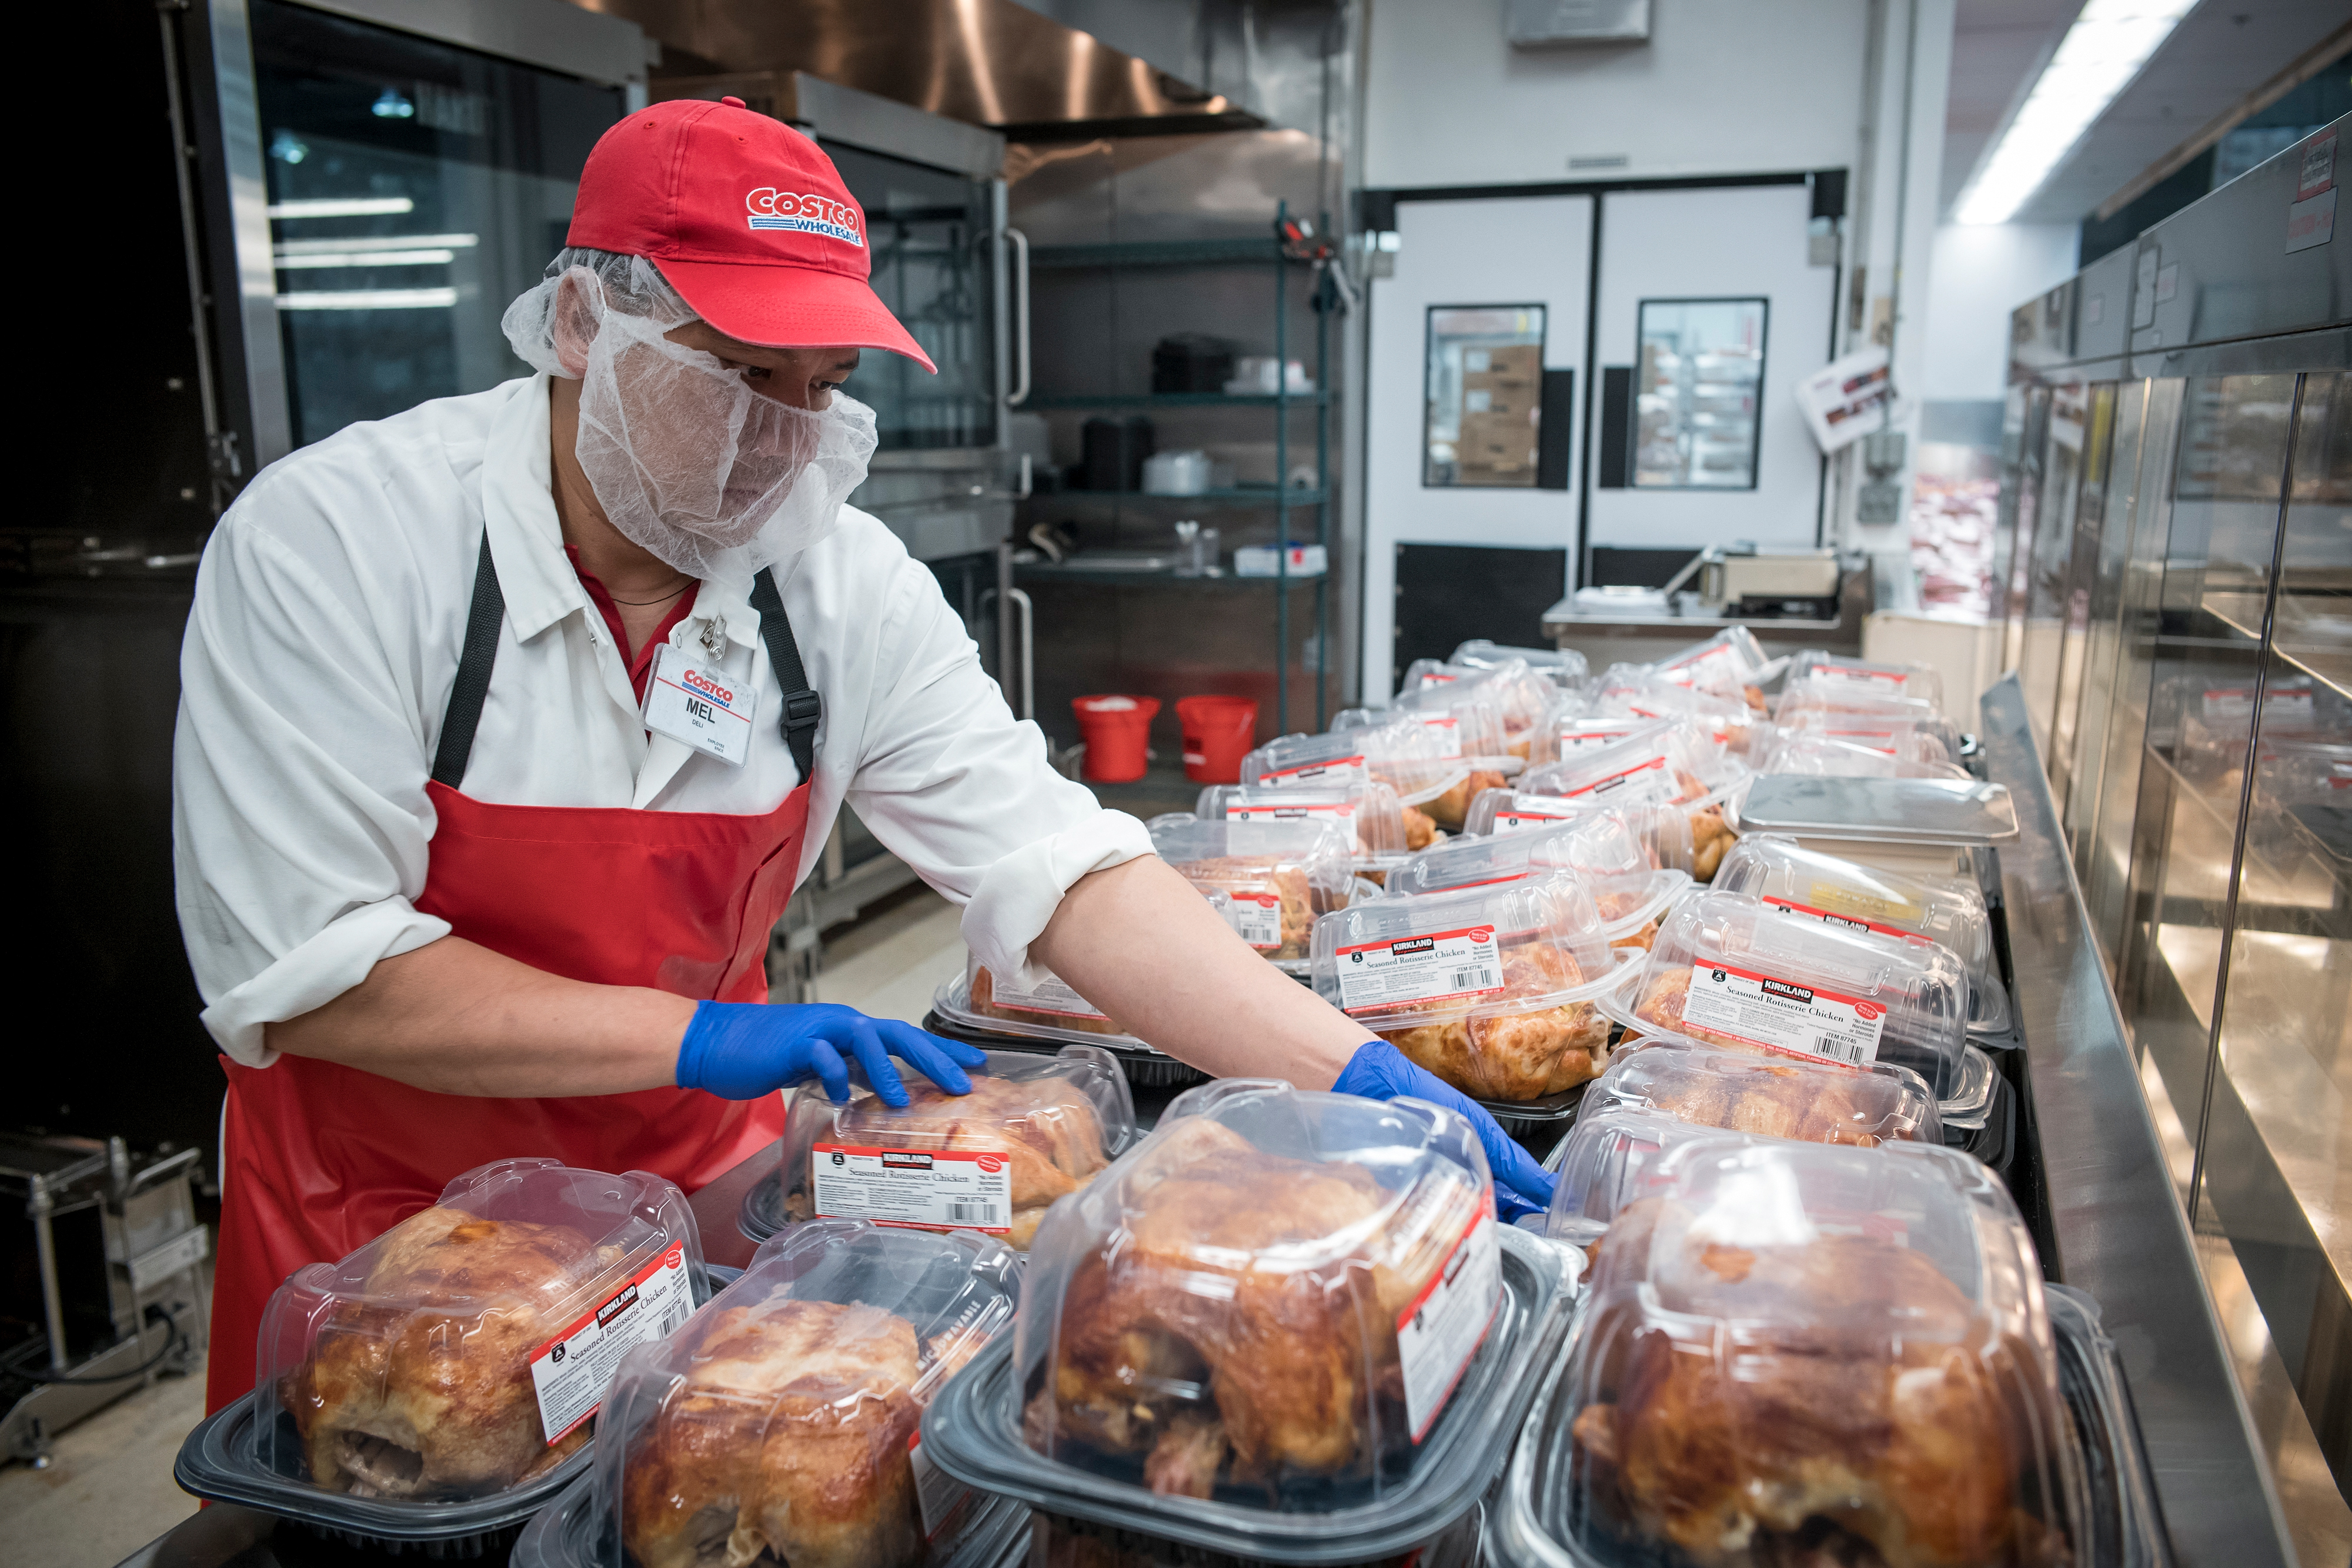 A Costco retail employee packs up rotisserie chickens for sale.